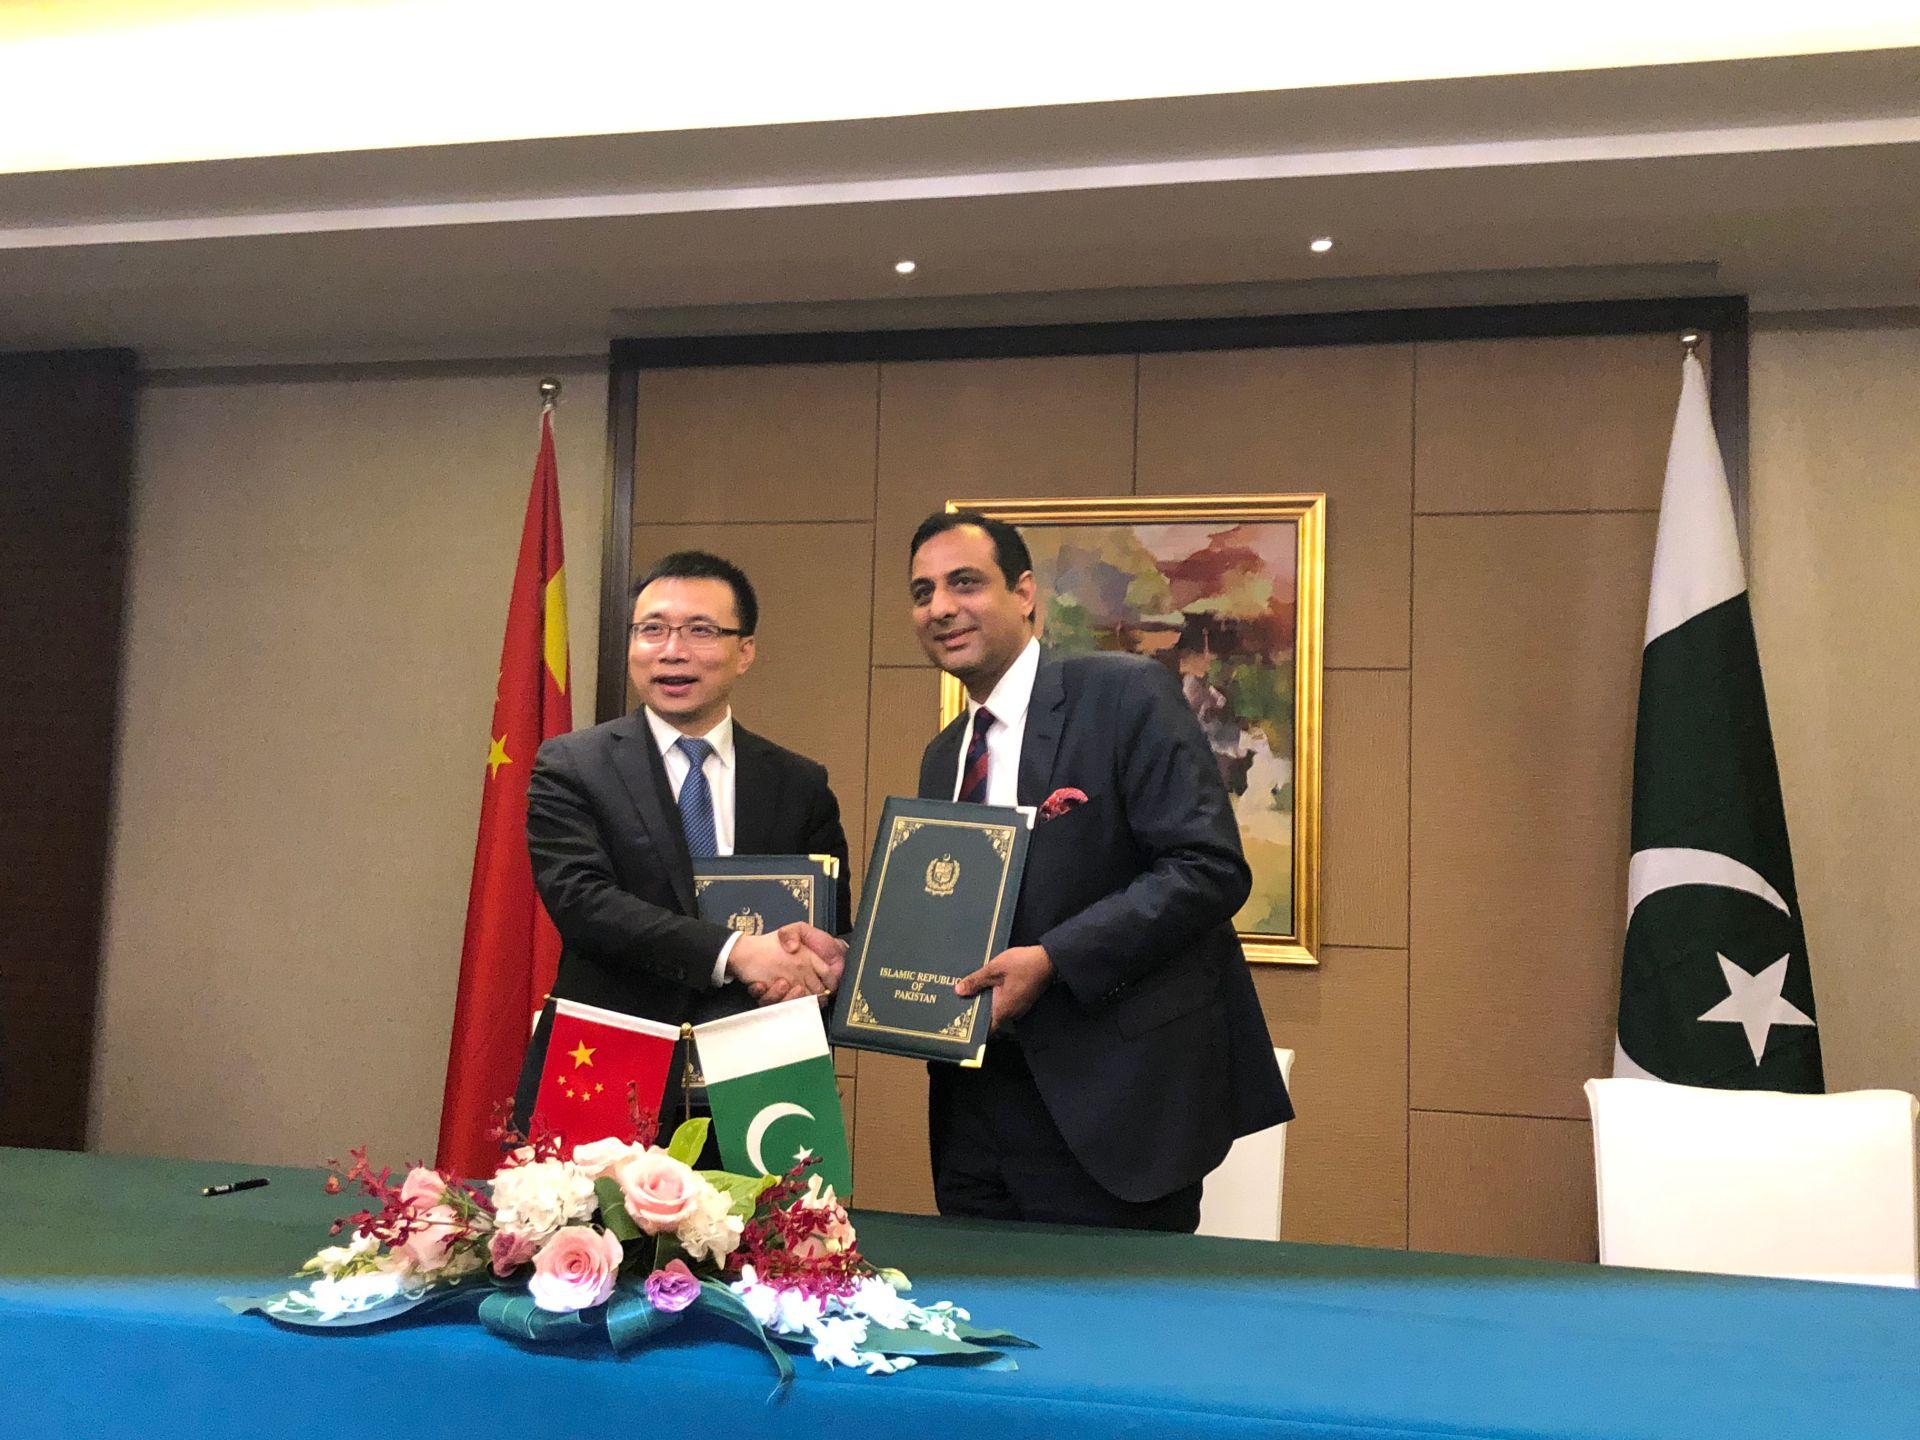 Airlink Communication and Huawei Technologies join hands for the next generation Cloud Computing & Data Centre in Pakistan